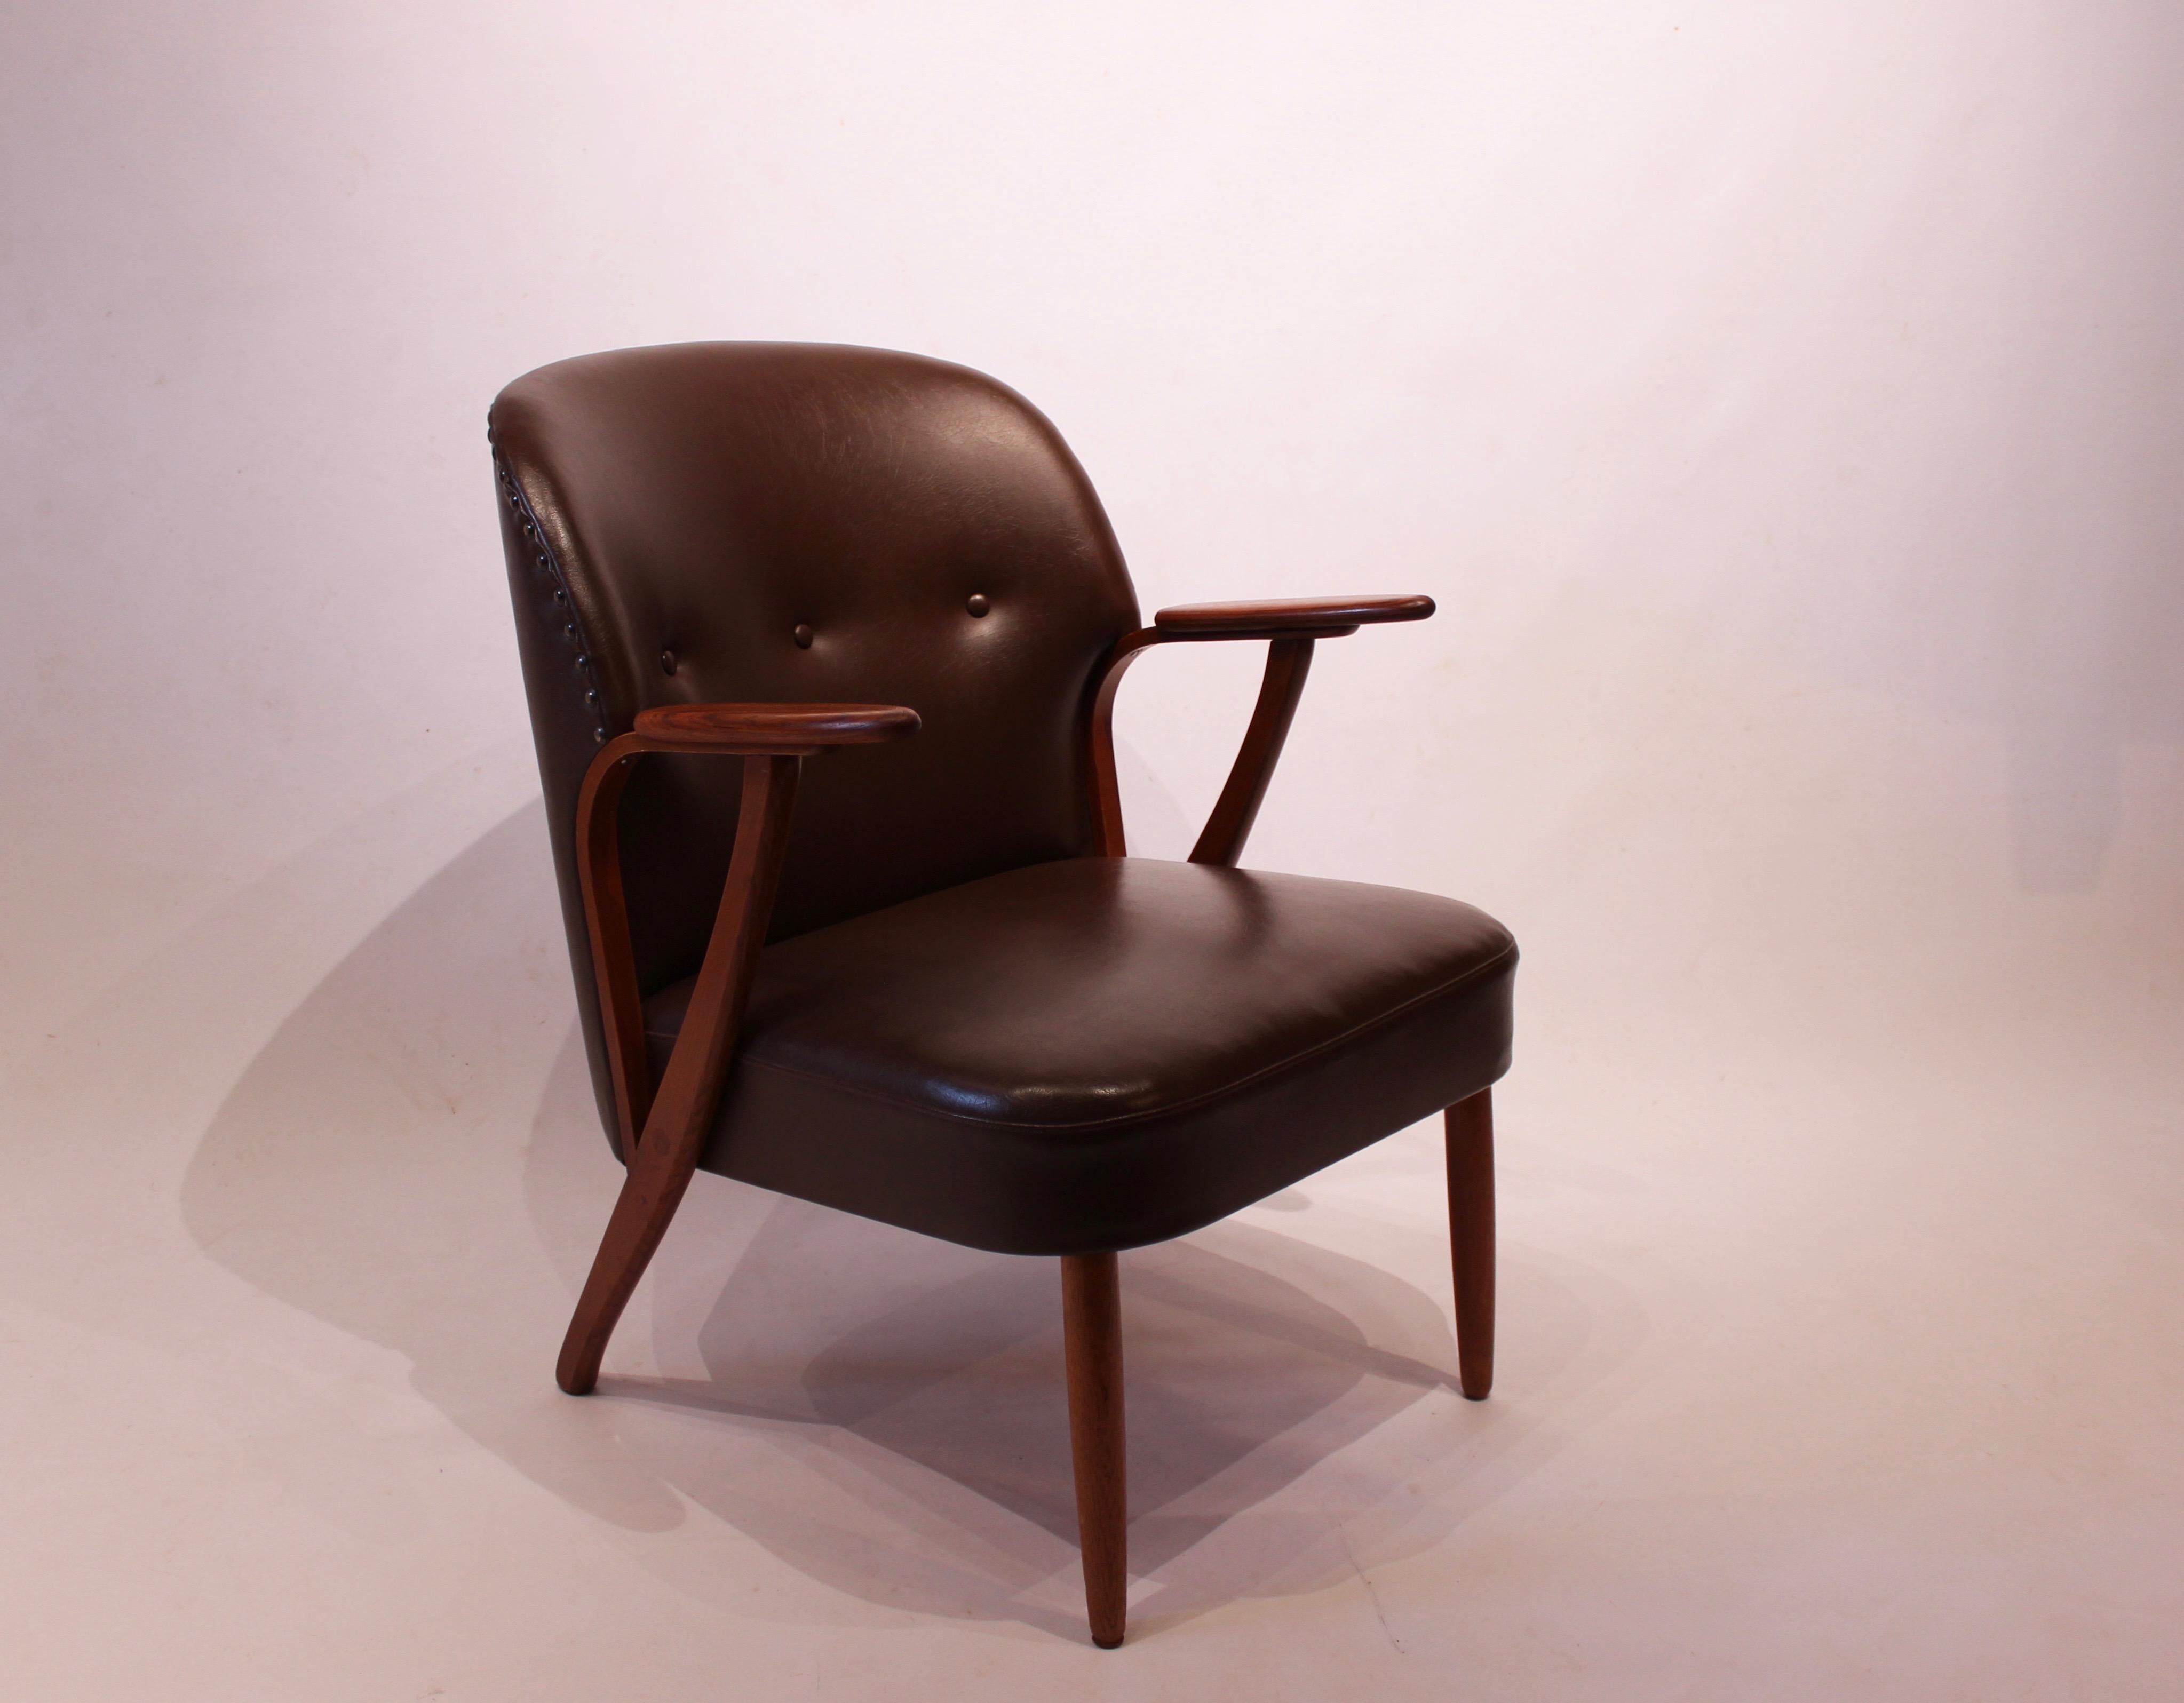 Easy chair of dark brown patinated leather and frame of teak, Danish design from the 1940s. The chair is in great vintage condition.